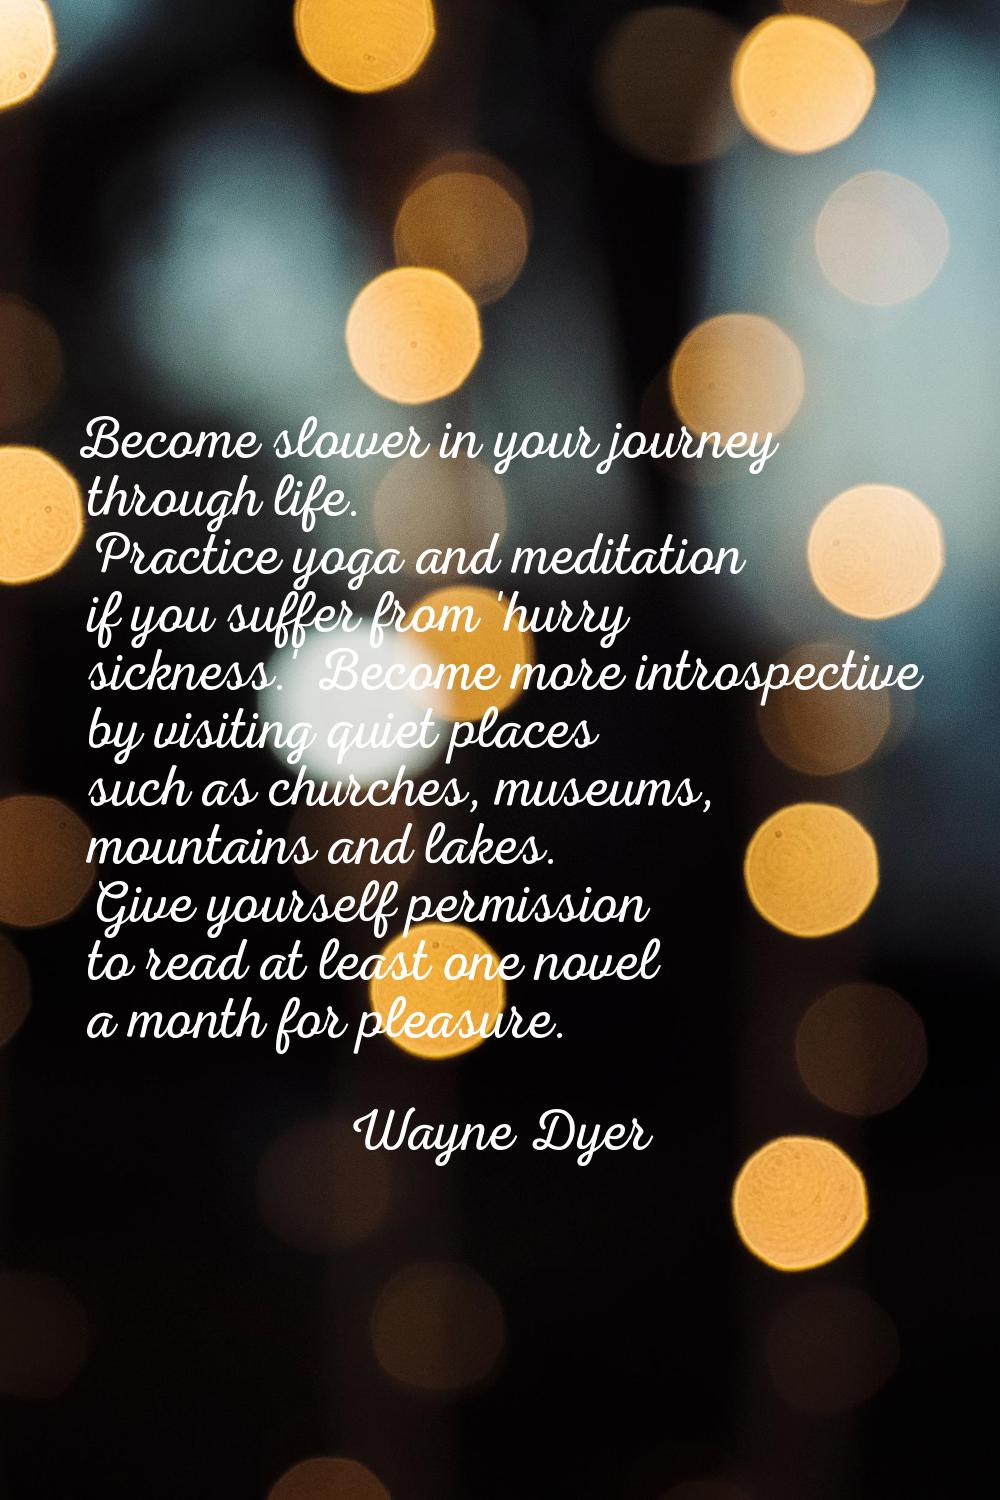 Become slower in your journey through life. Practice yoga and meditation if you suffer from 'hurry 